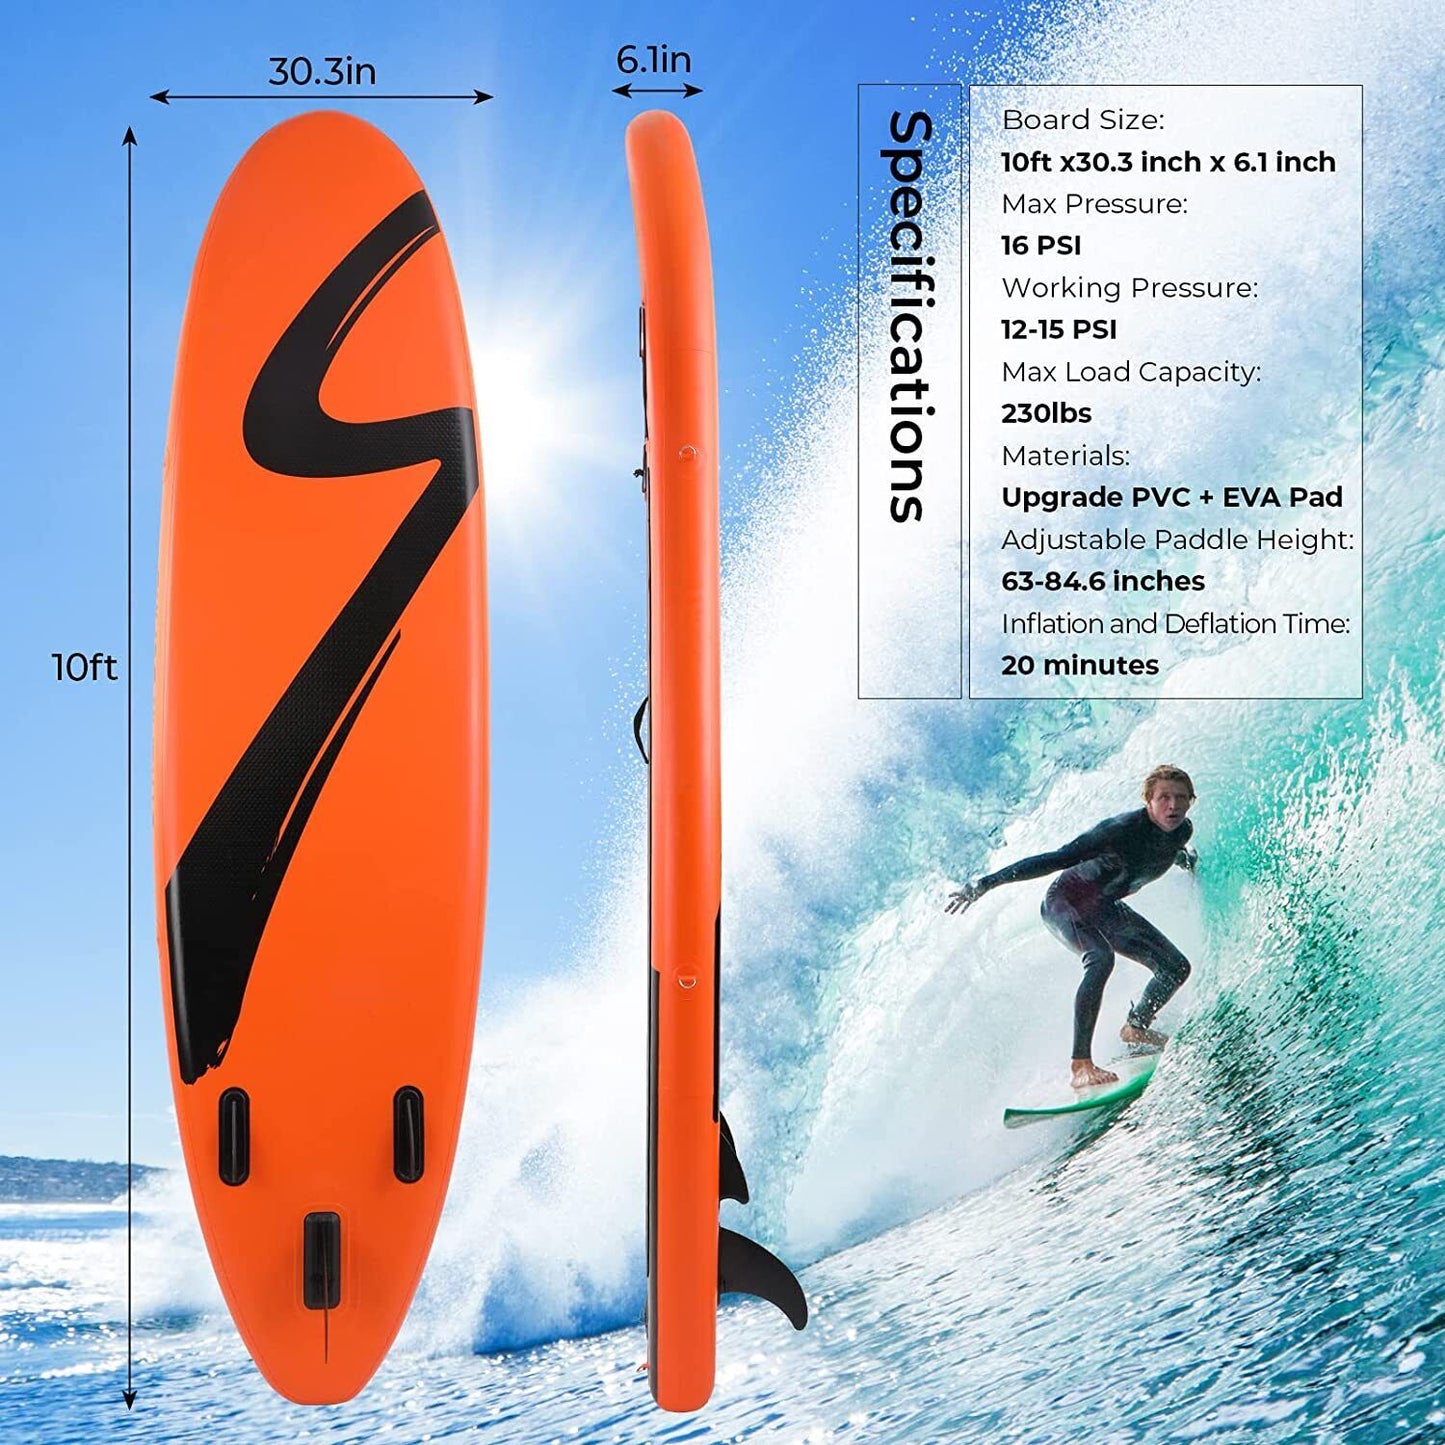 Arlopu 10FT Stand Up Paddle Board Inflatable SUP Non-Slip Deck with Paddle, Pump, Backpack